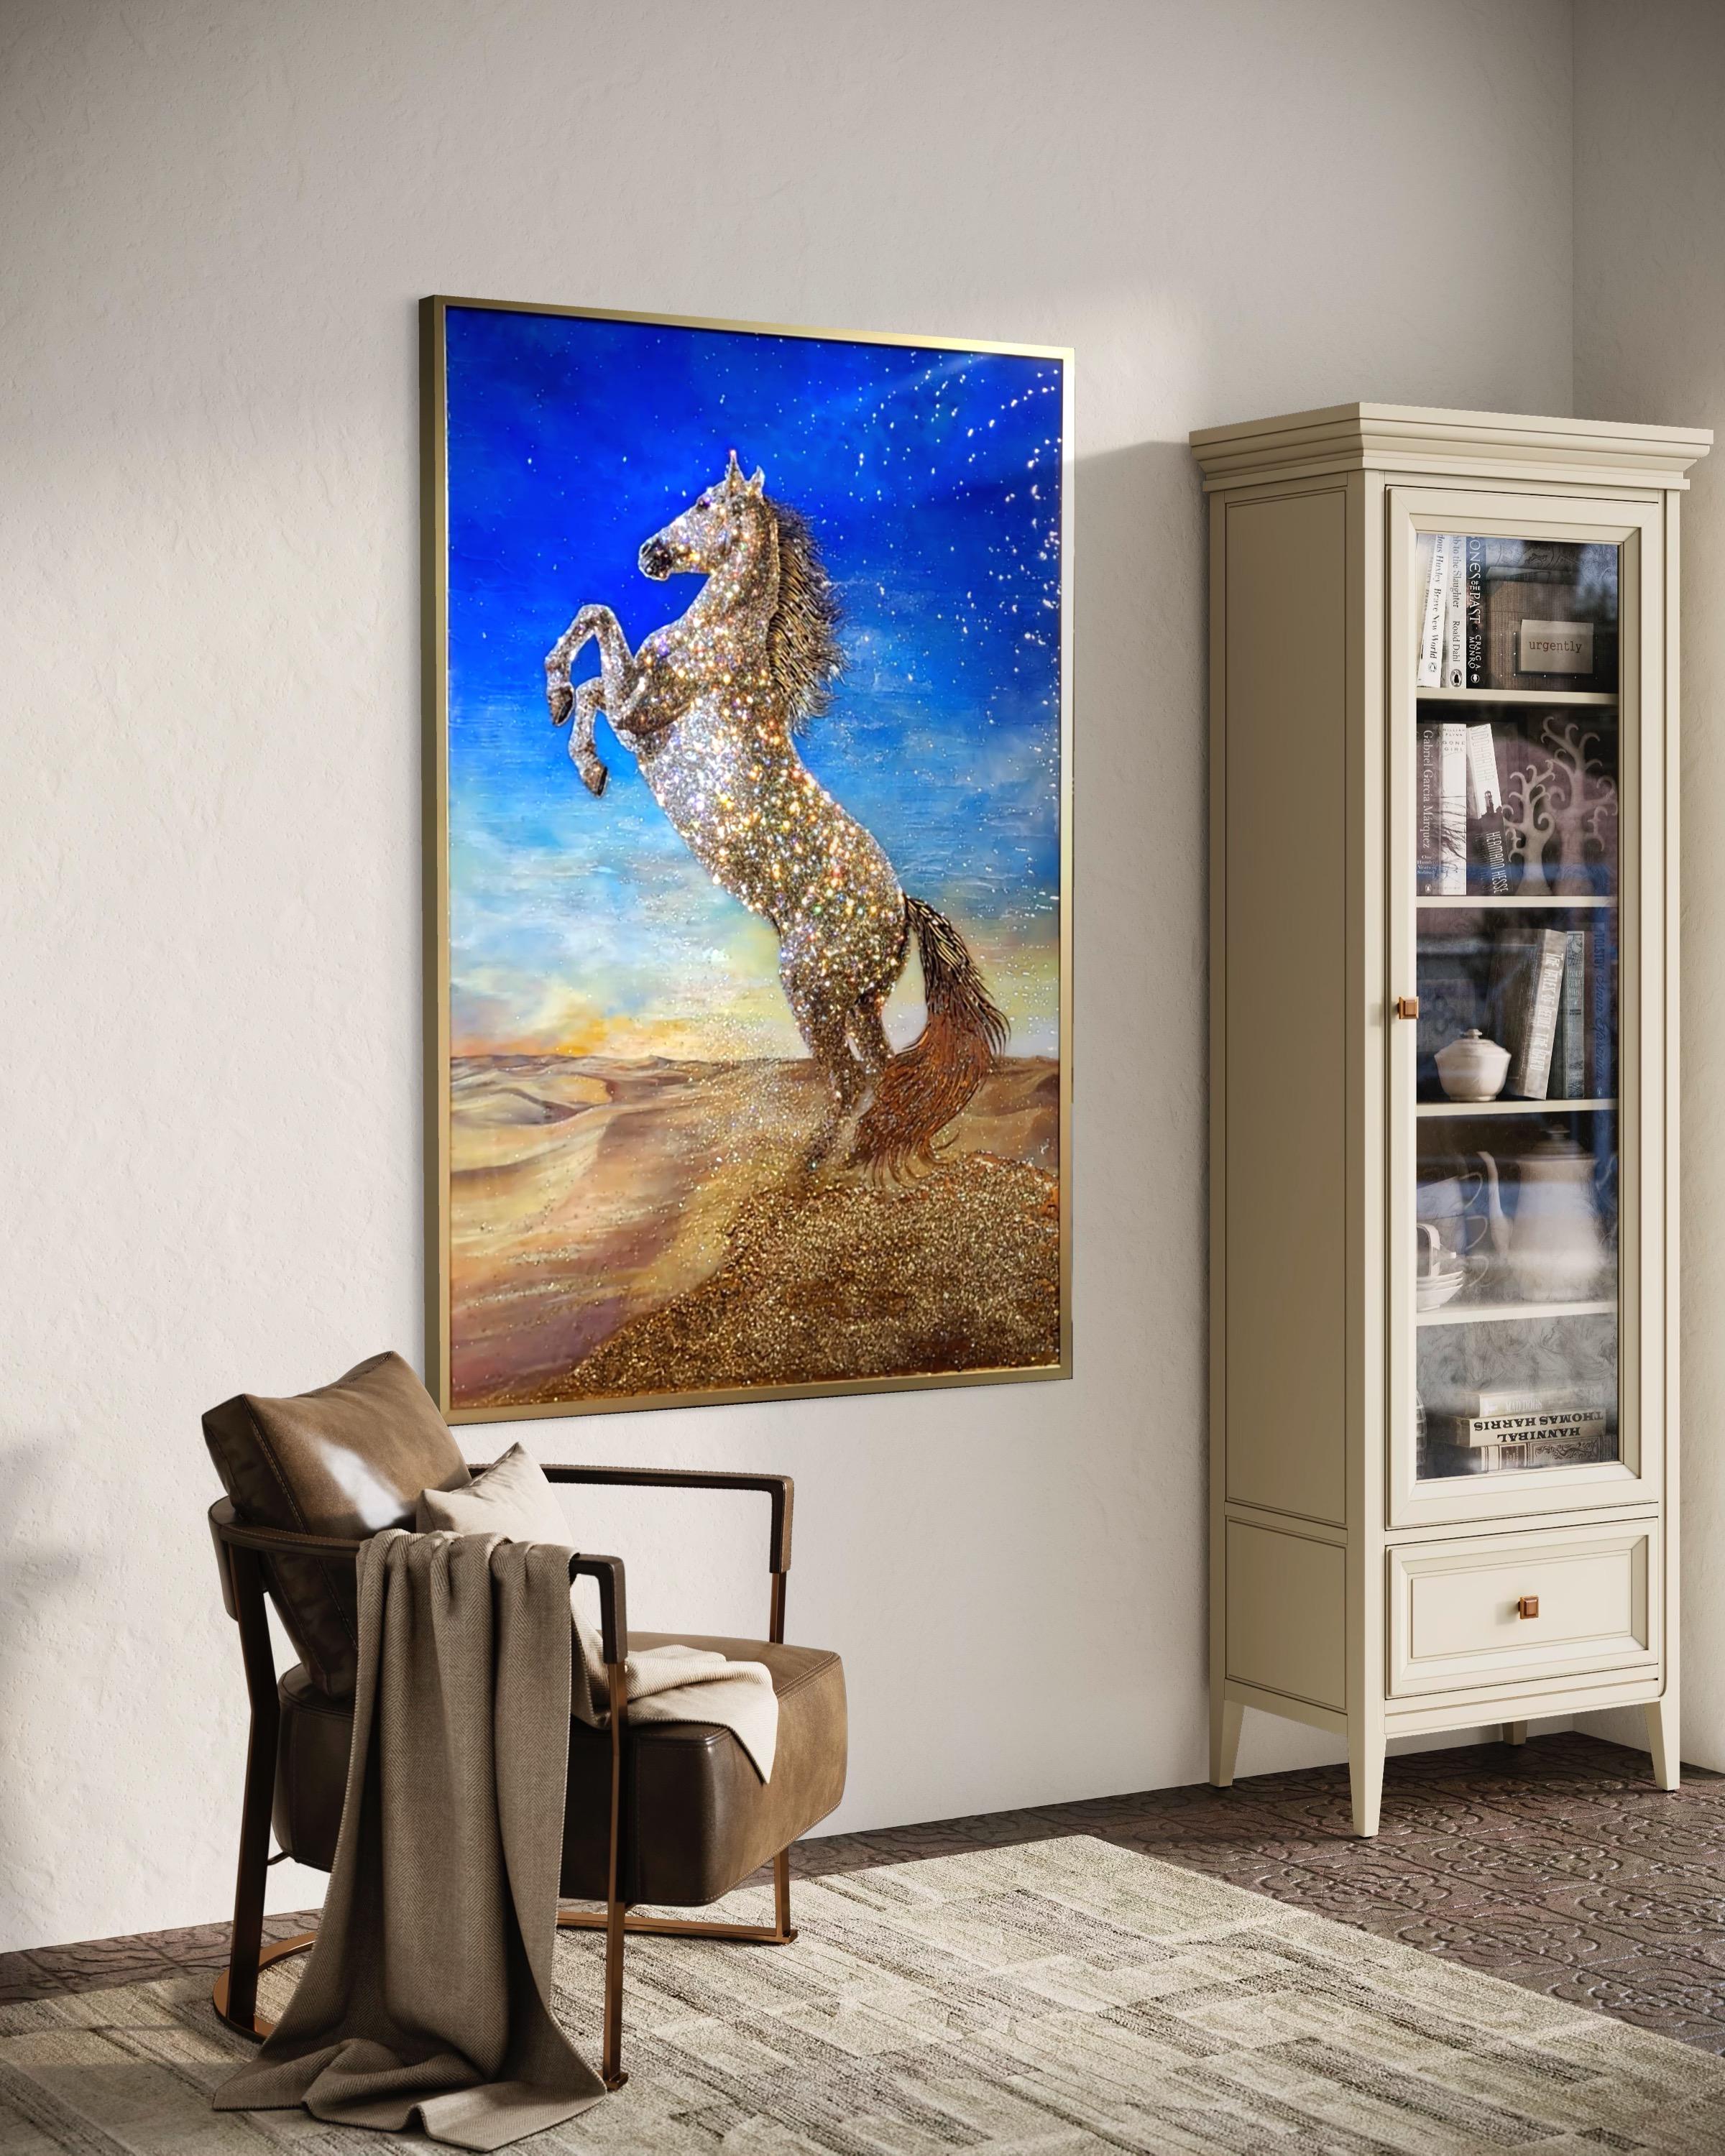 Paintings and interior panels are all original works crated by Lily Art, those are made without any exception of high-quality materials and original Swarovski crystals. All works are delivered with the artist's signature and stamp and are protected